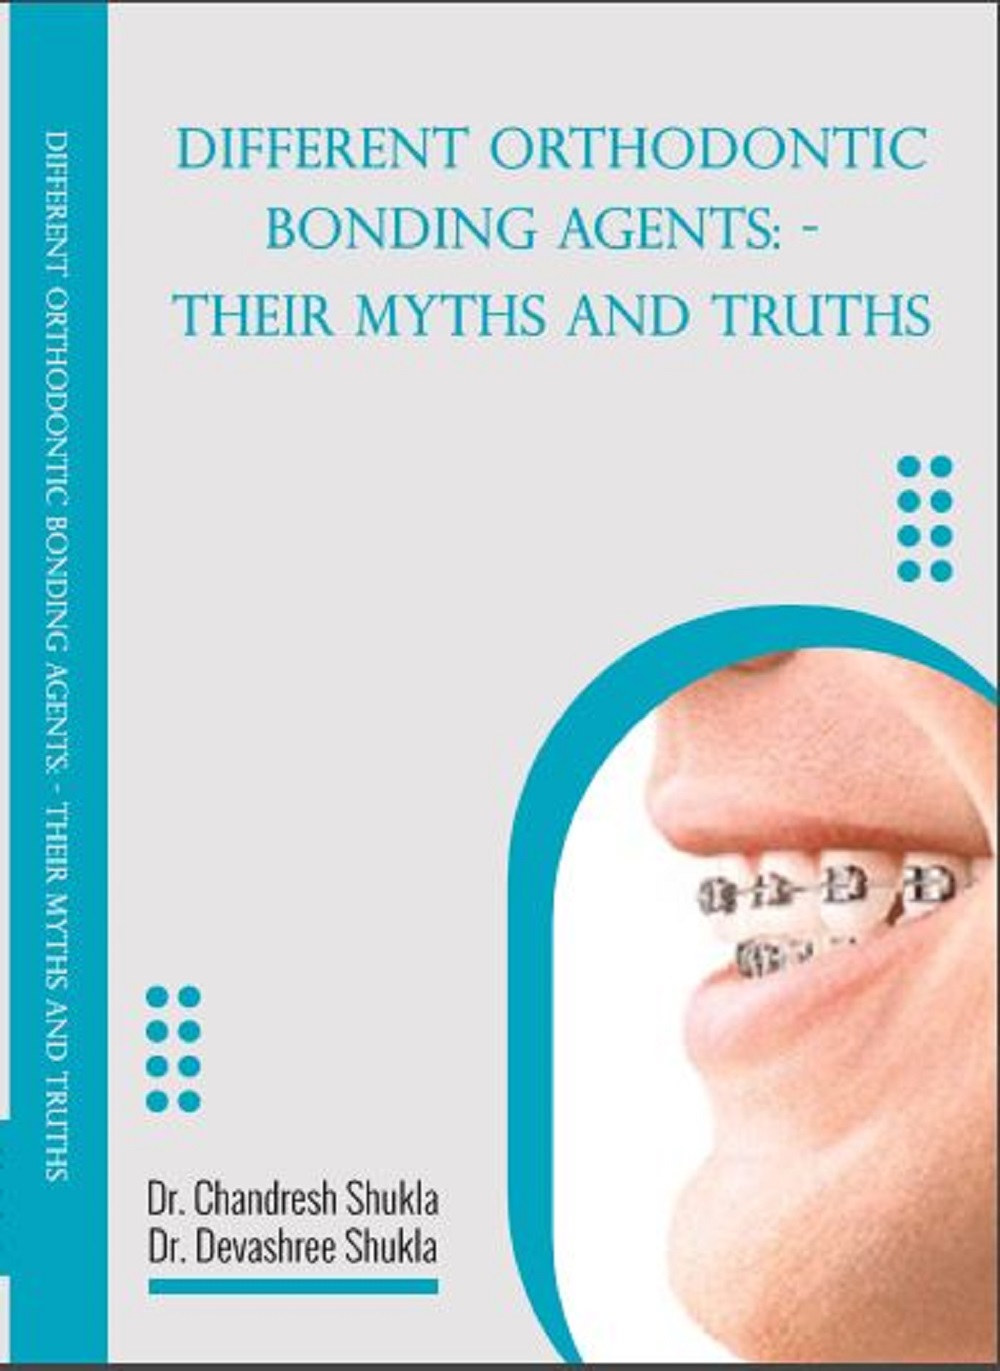 DIFFERENT ORTHODONTIC BONDING AGENTS: – THEIR MYTHS AND TRUTHS